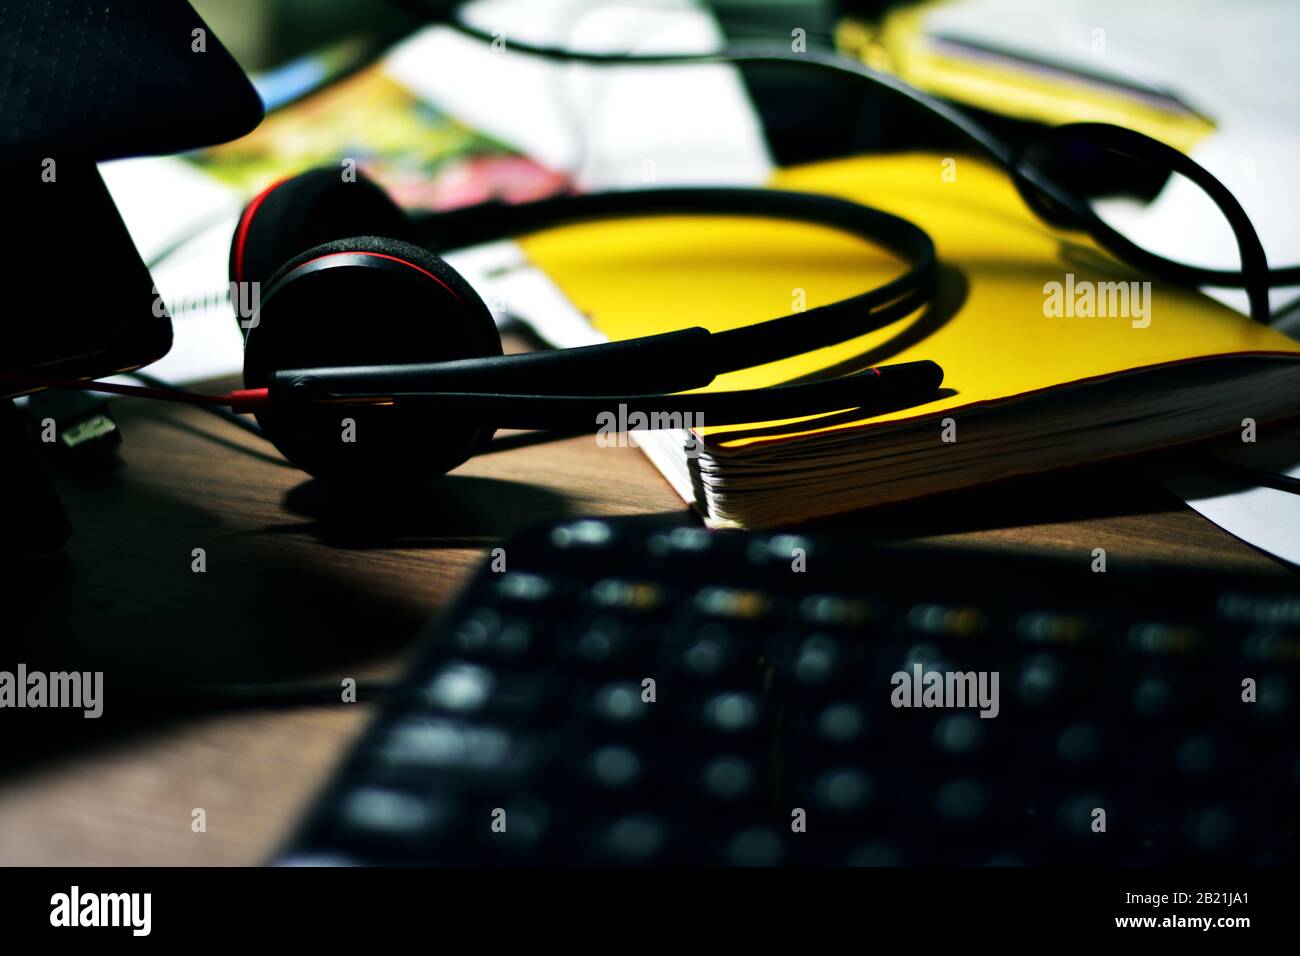 Messy desktop with headset and keyboard Stock Photo